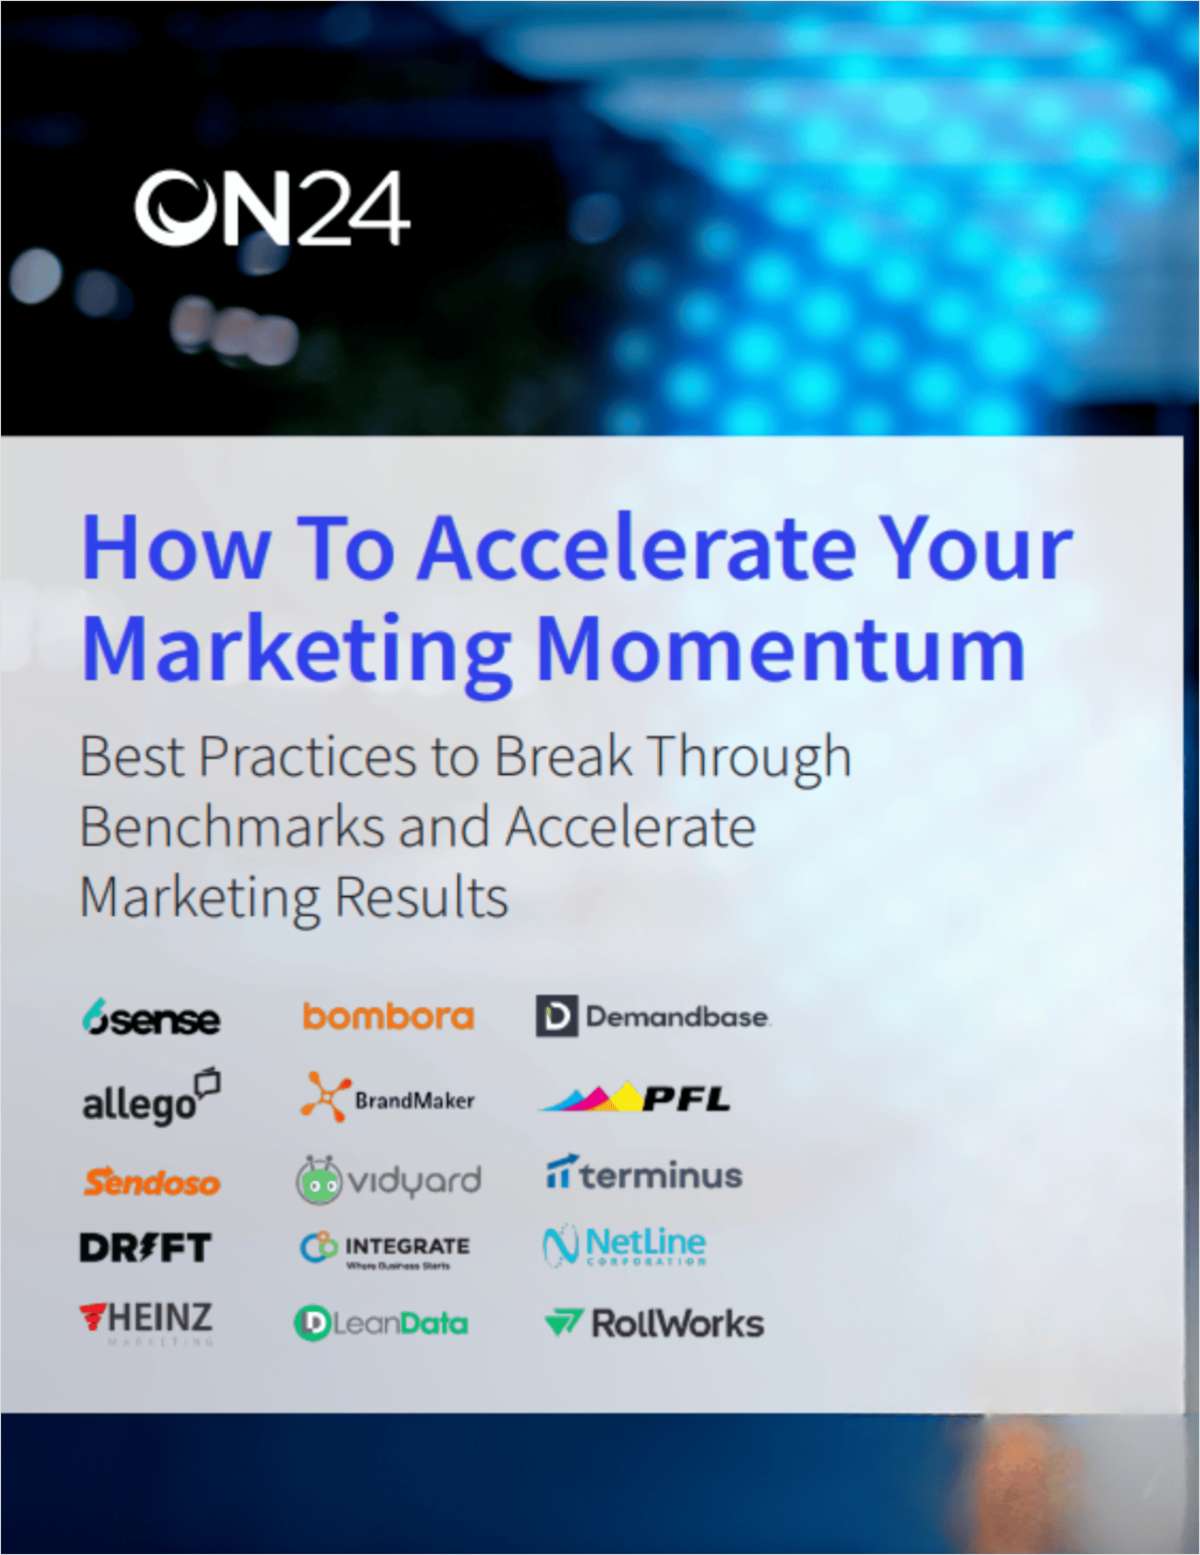 How to Accelerate Your Marketing Momentum